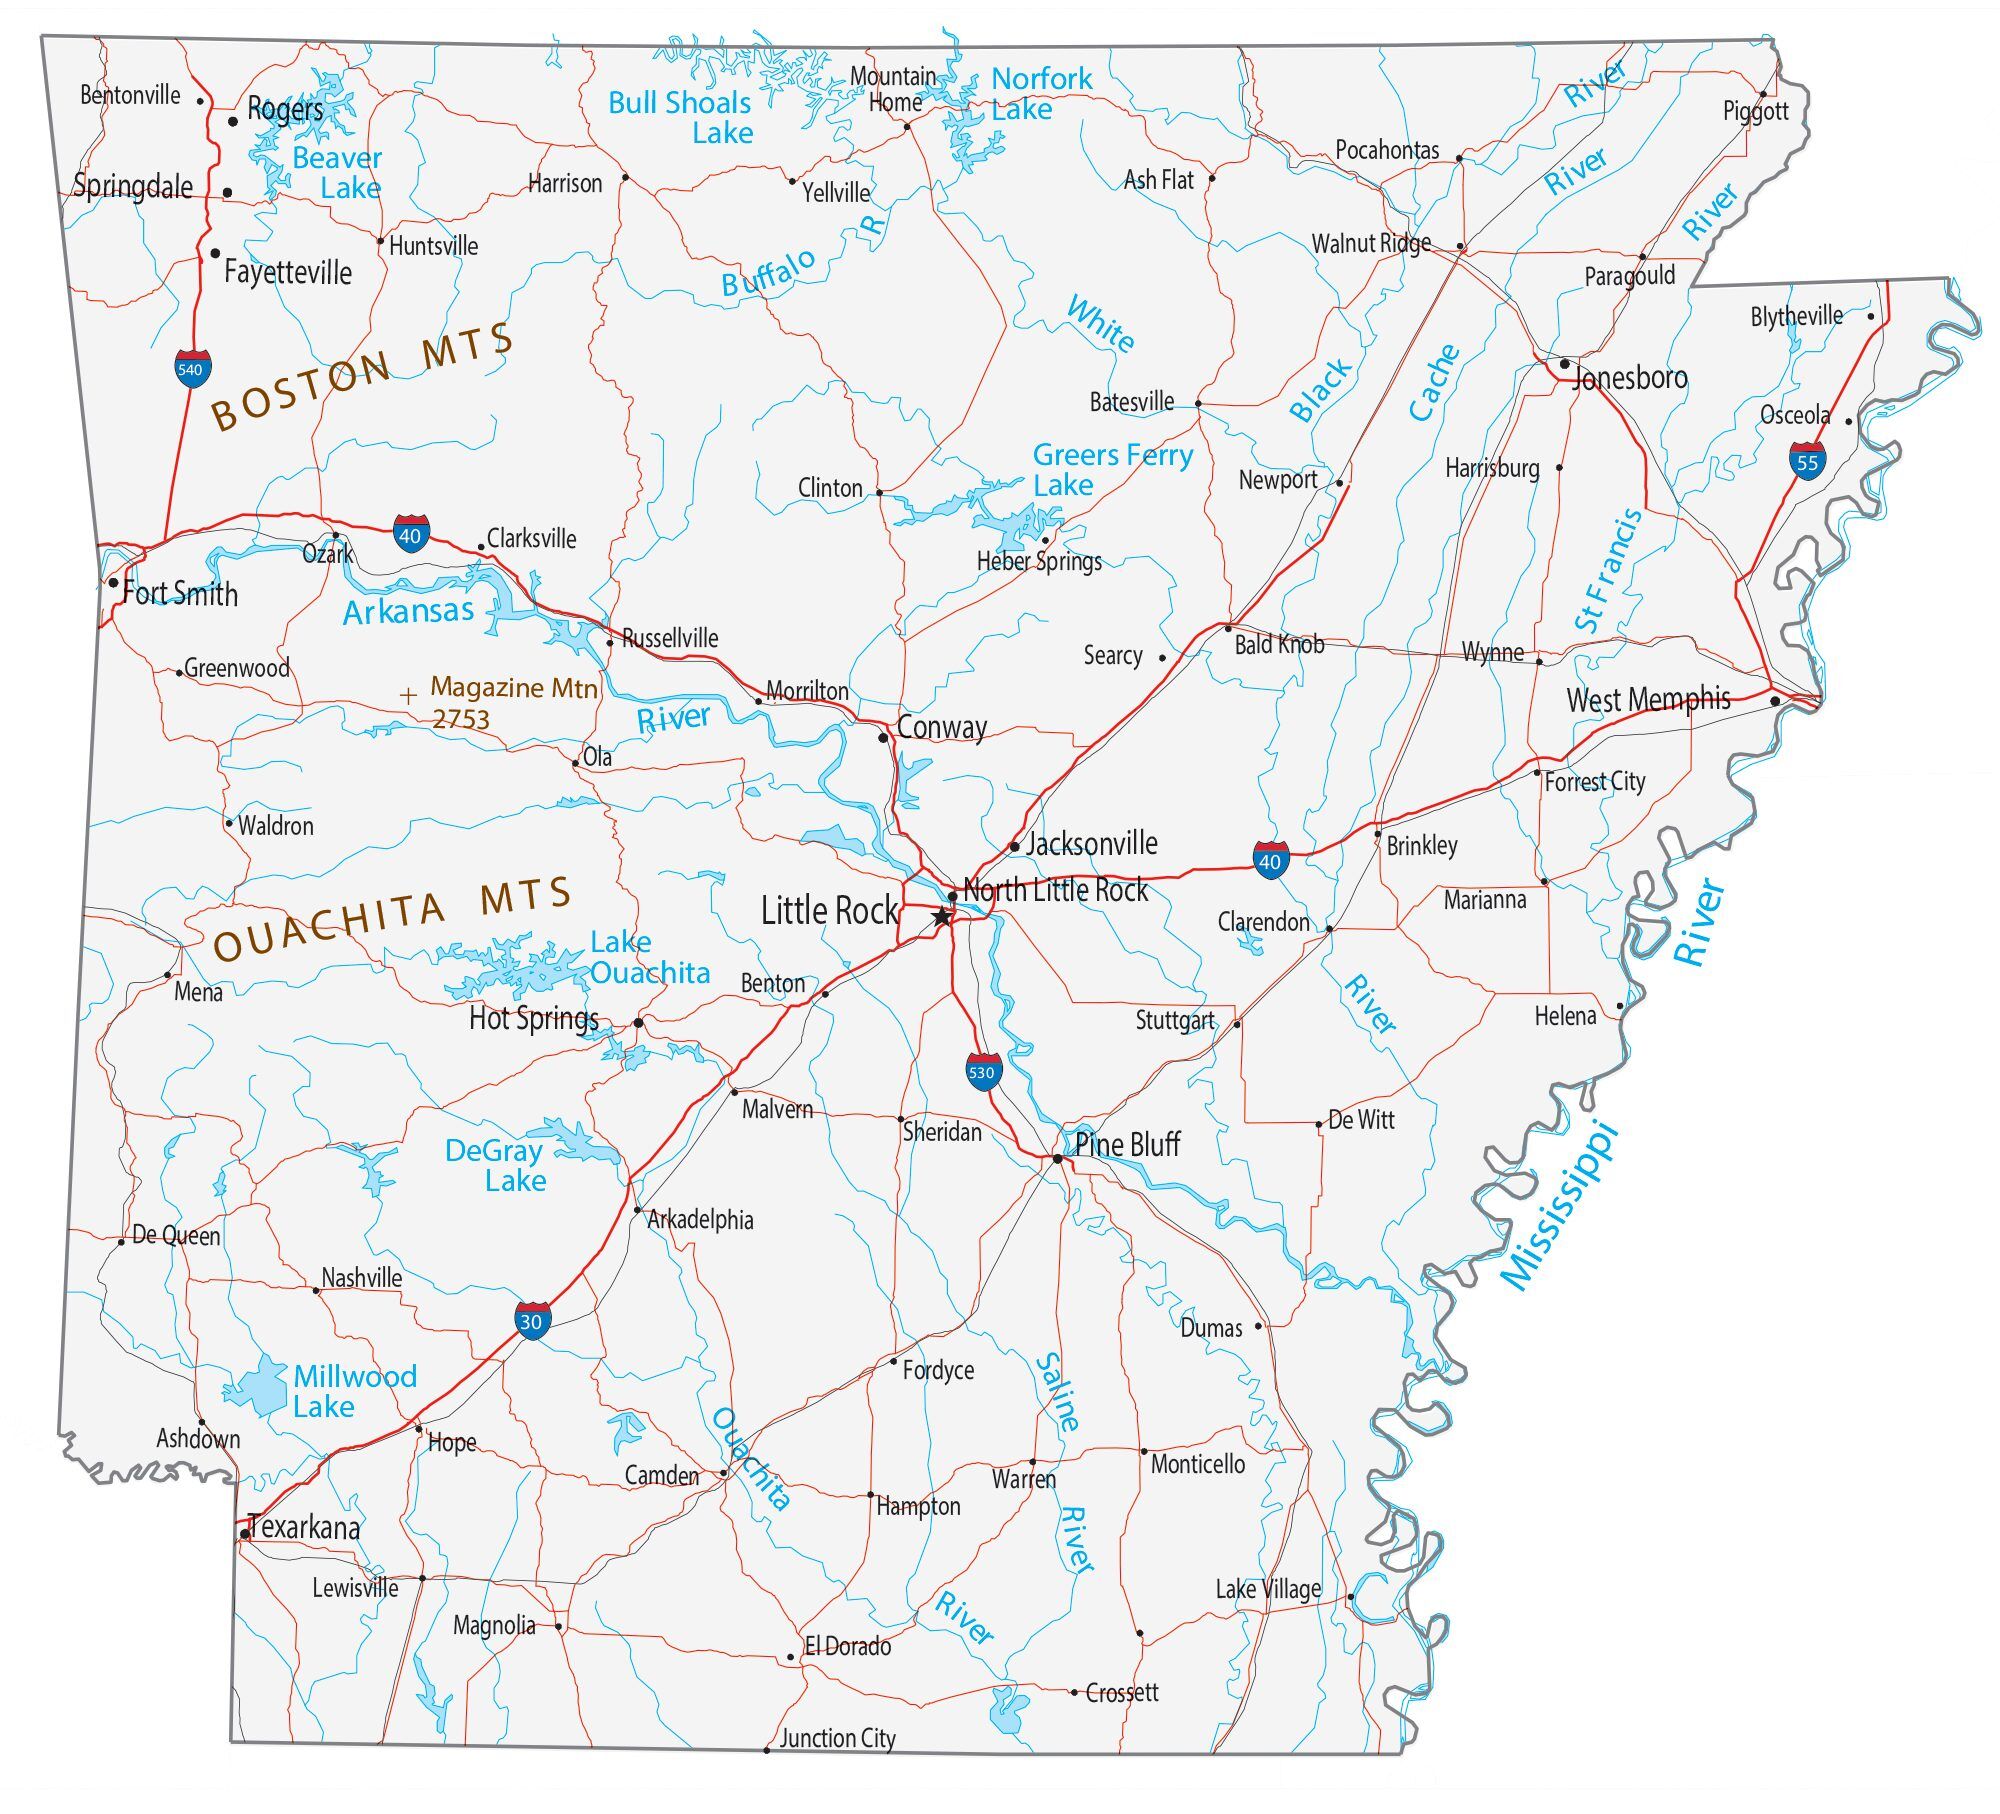 Map of Arkansas - Cities and Roads - GIS Geography